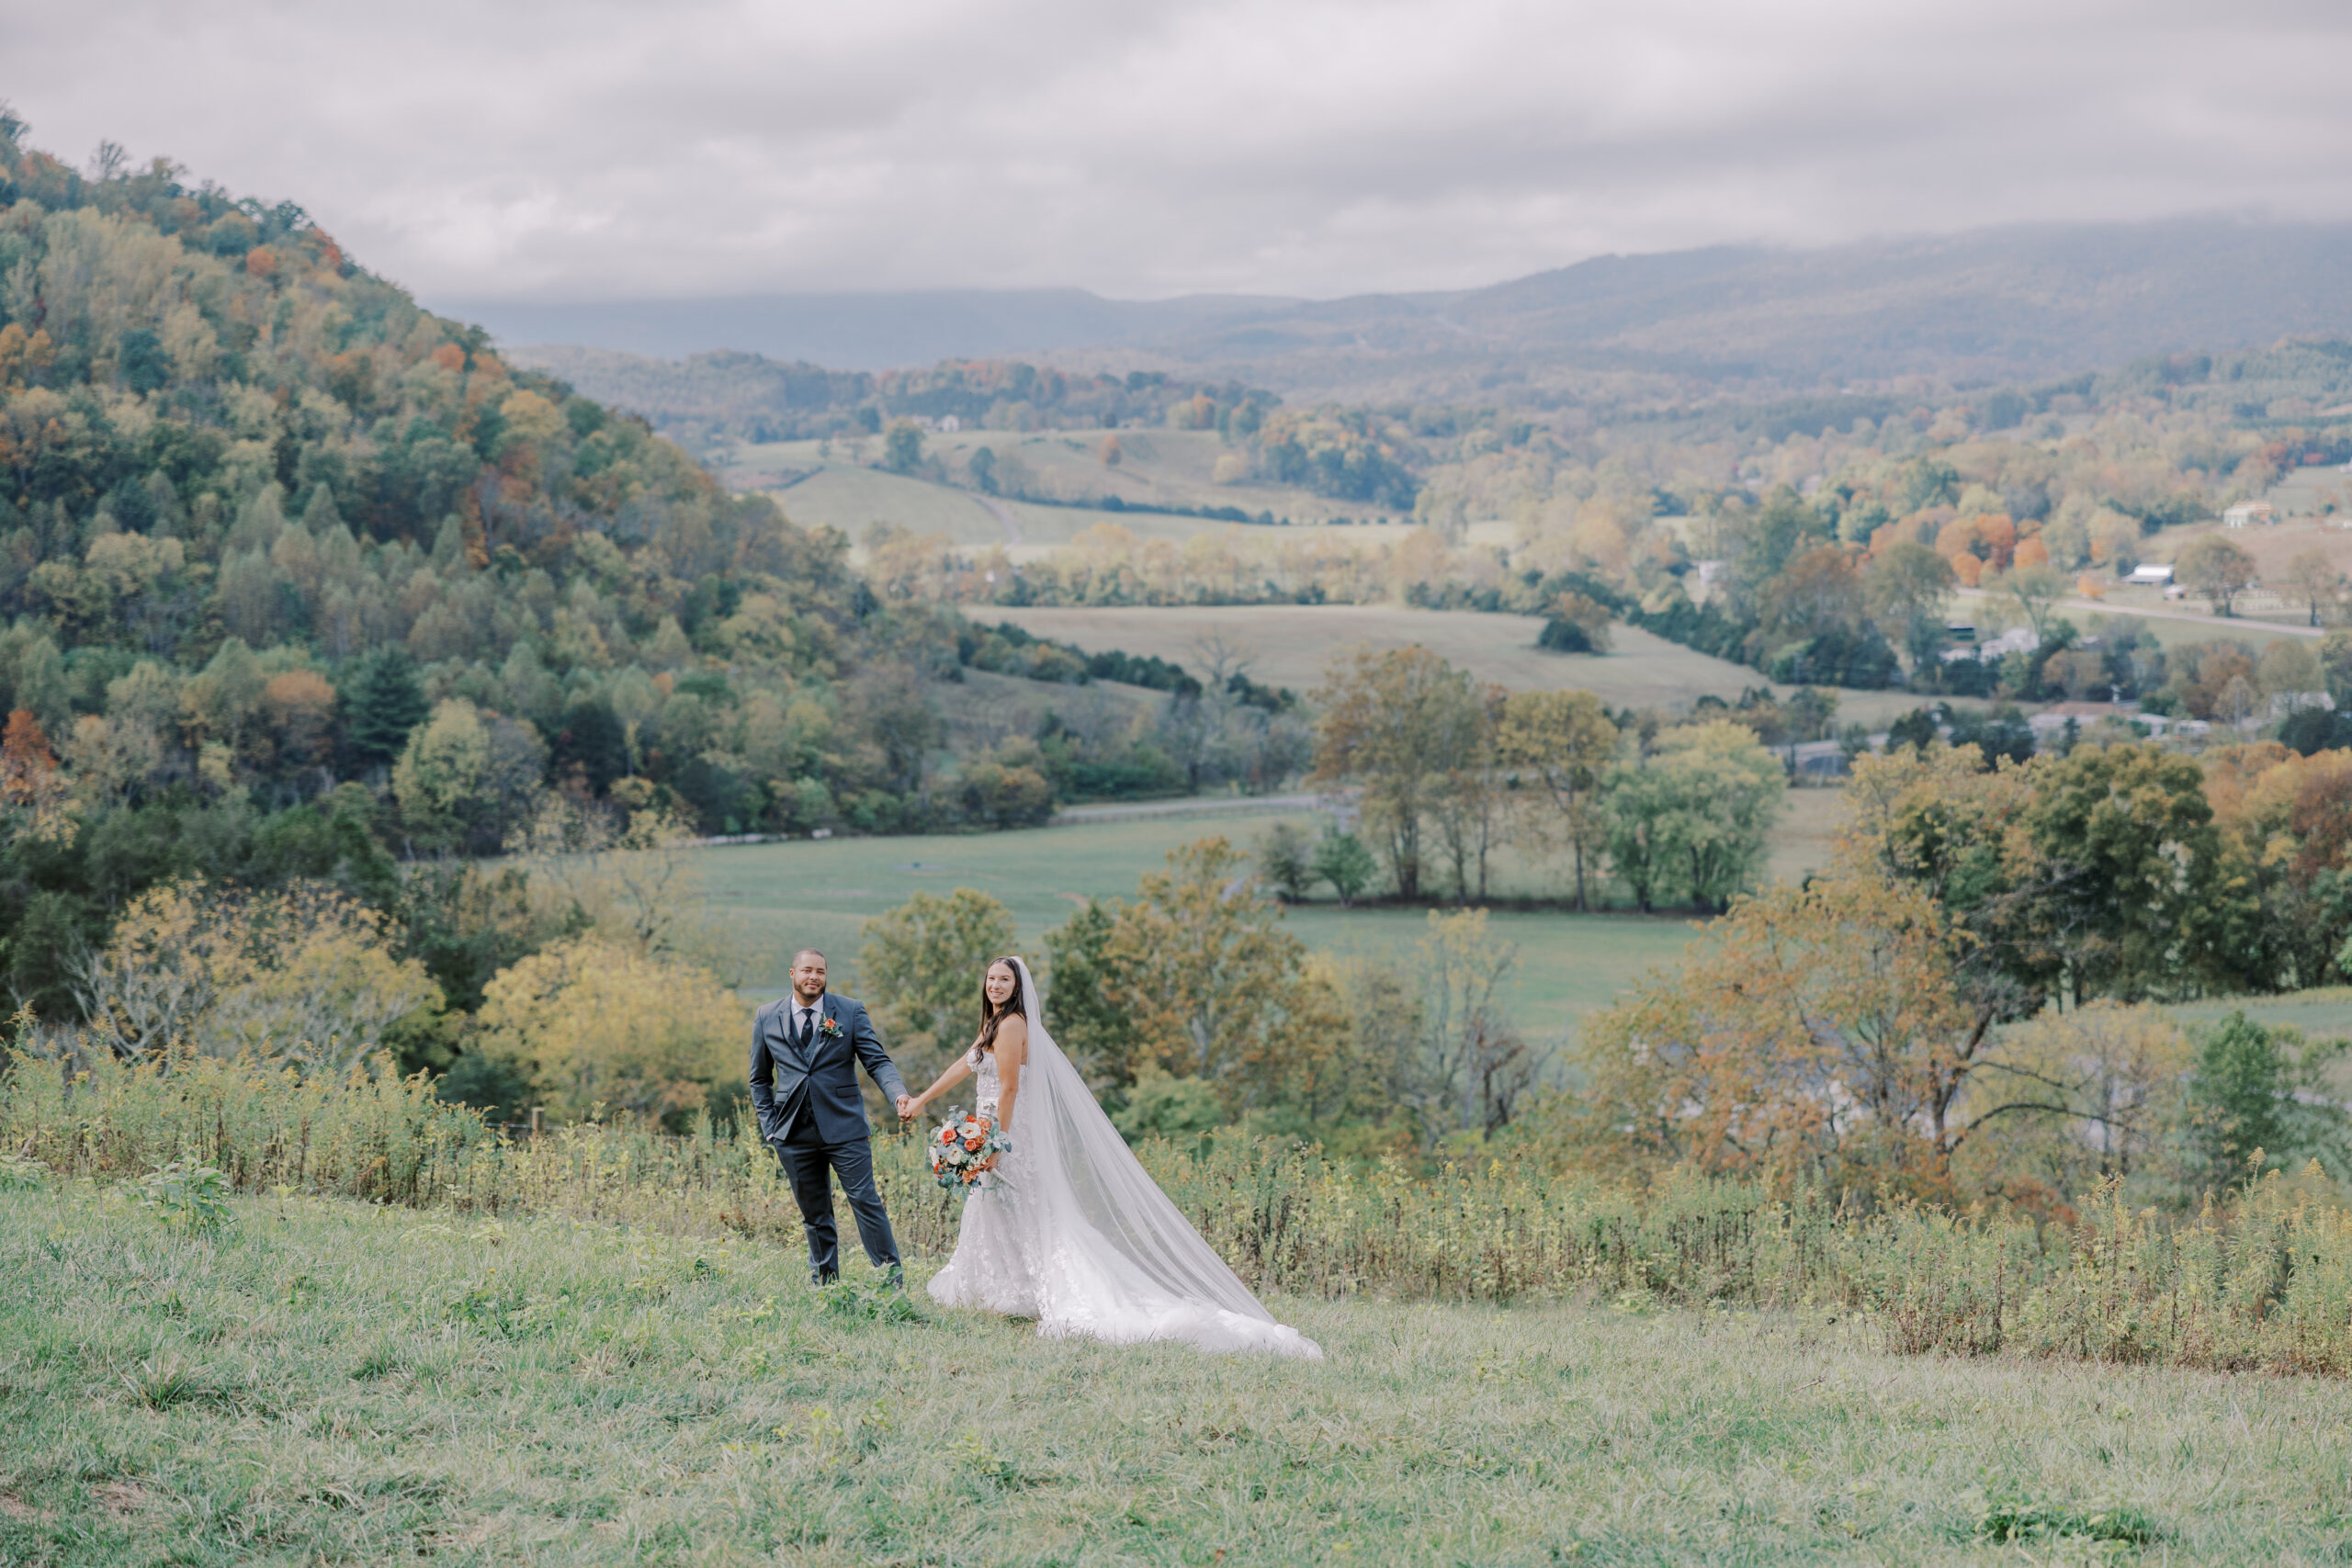 the bride and groom pose in front of the beautiful landscape at Big Spring Farm